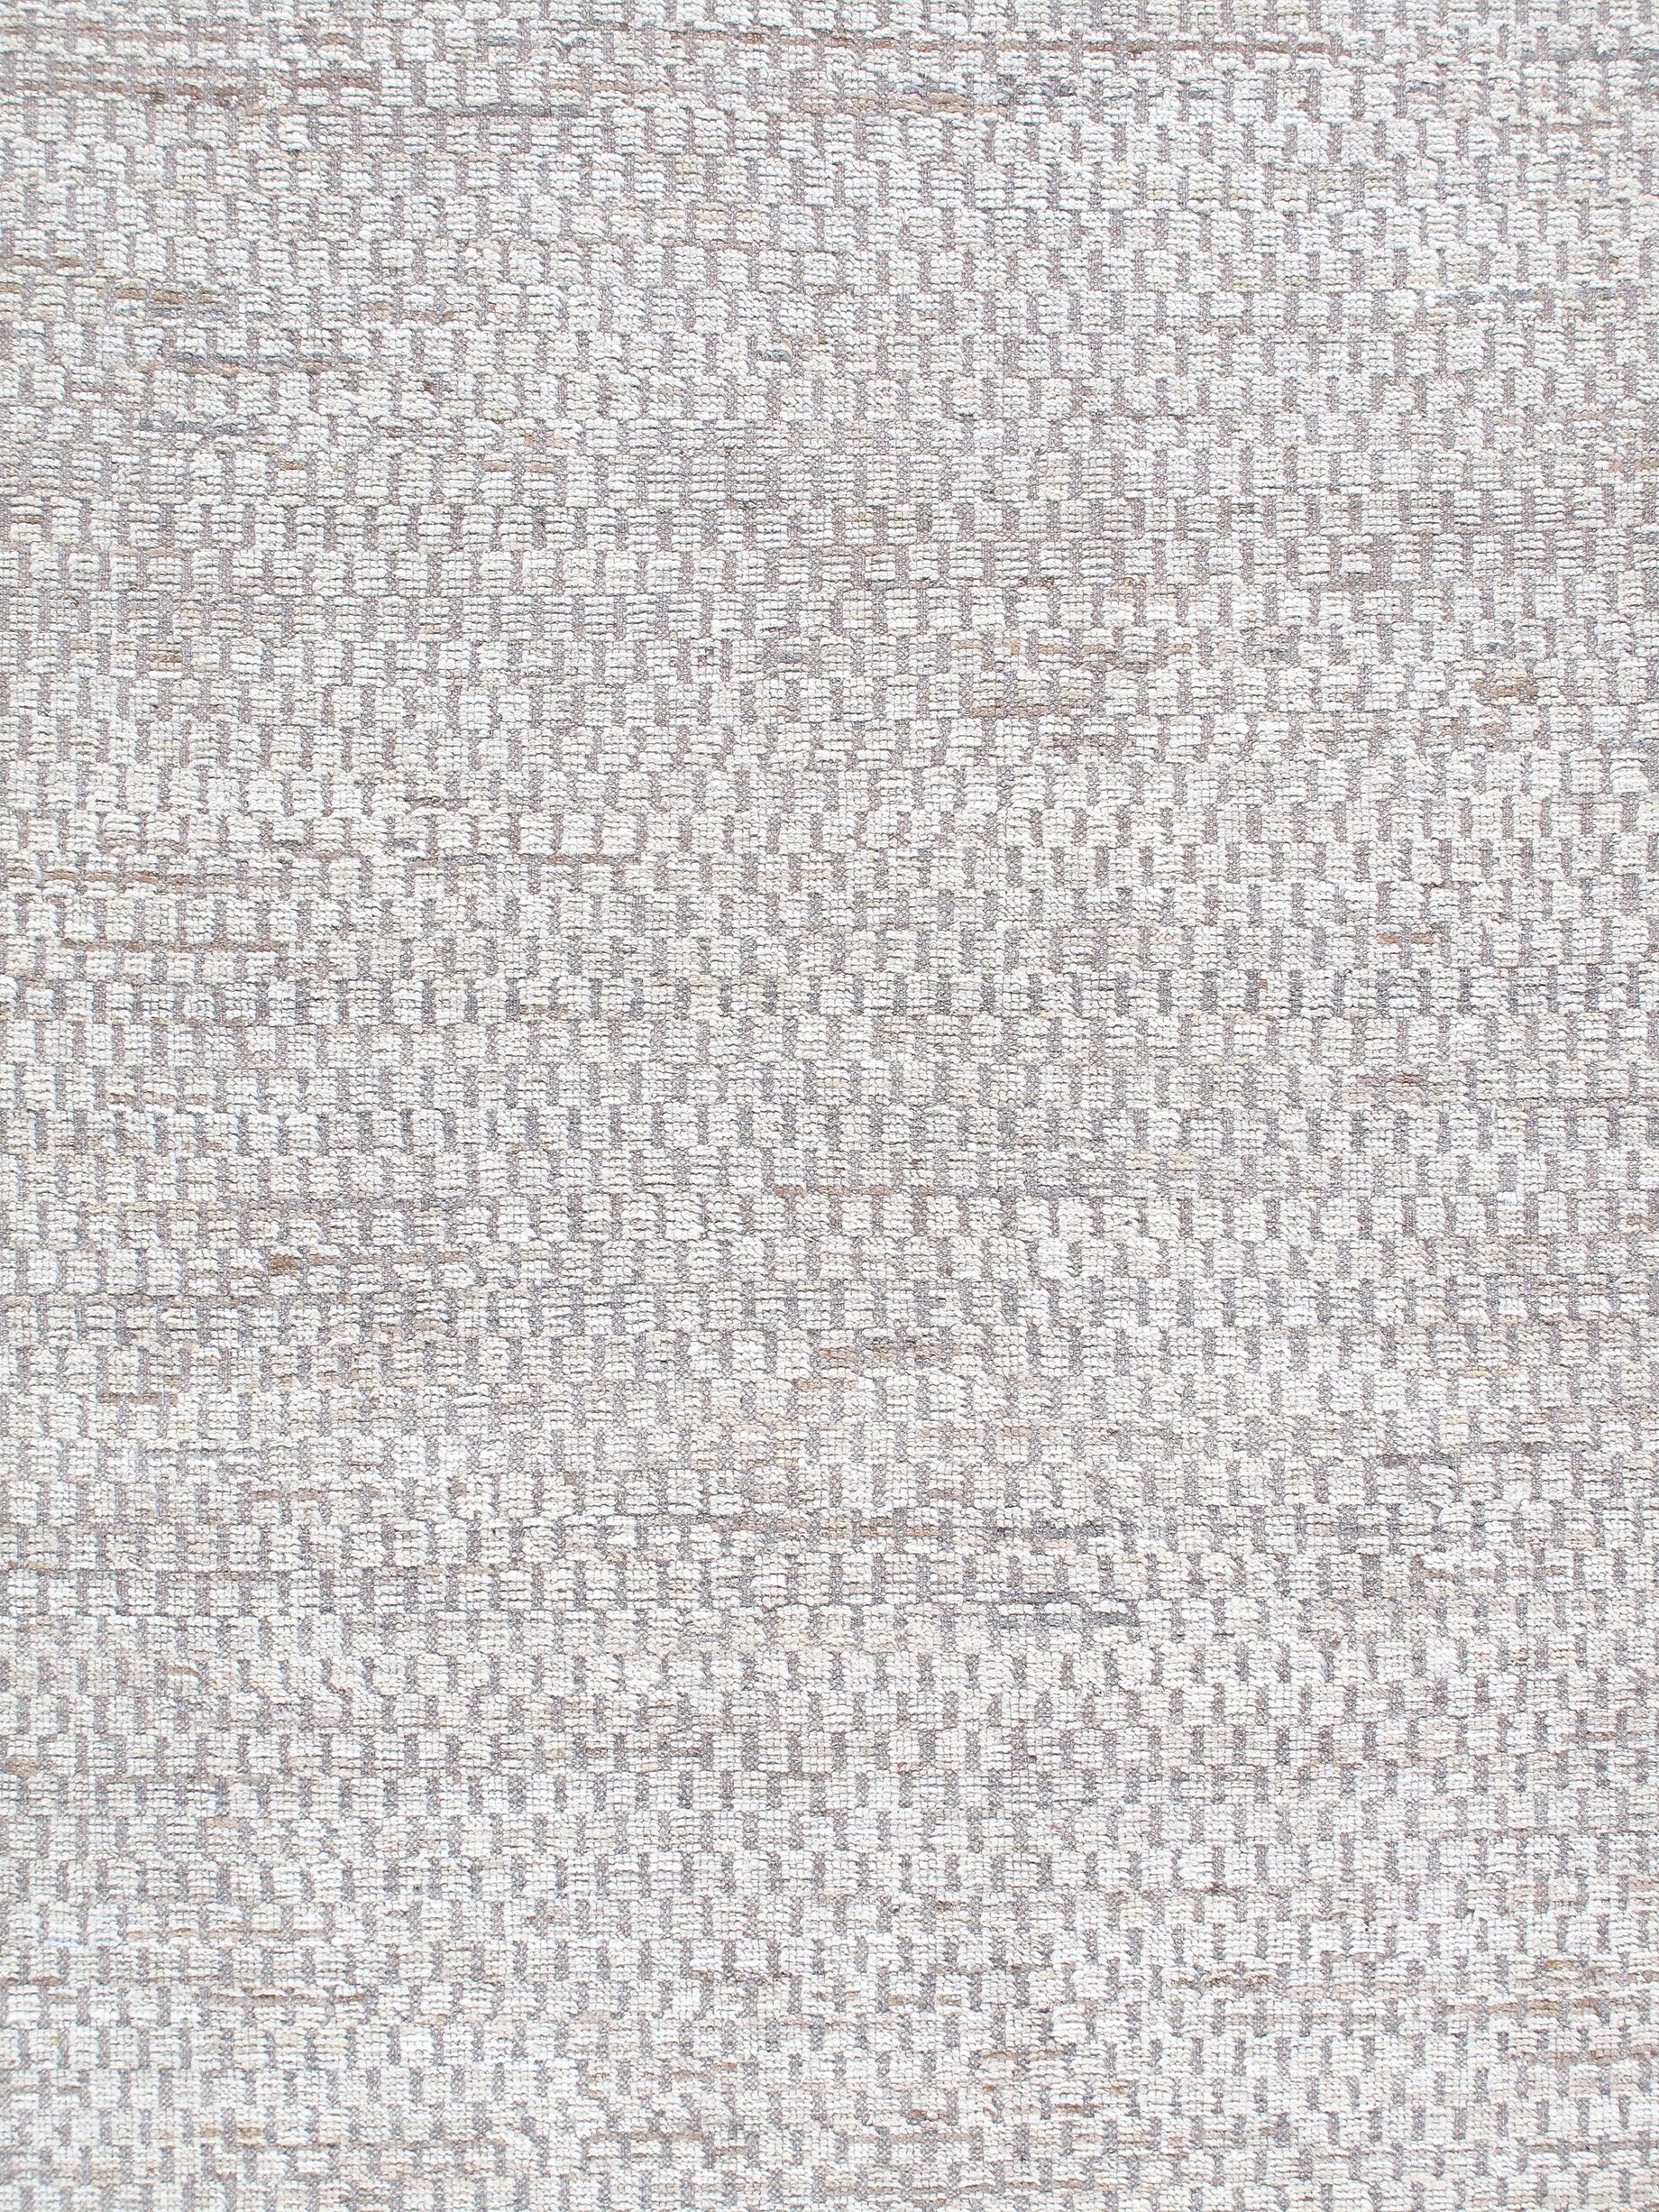 Our Pashmina rug is hand-knotted and made from the finest, hand-carded, hand-spun, natural wool. The combination of neutral tones along with its all-over textural design, makes this a perfect transitional, modern piece. Custom sizes and colors